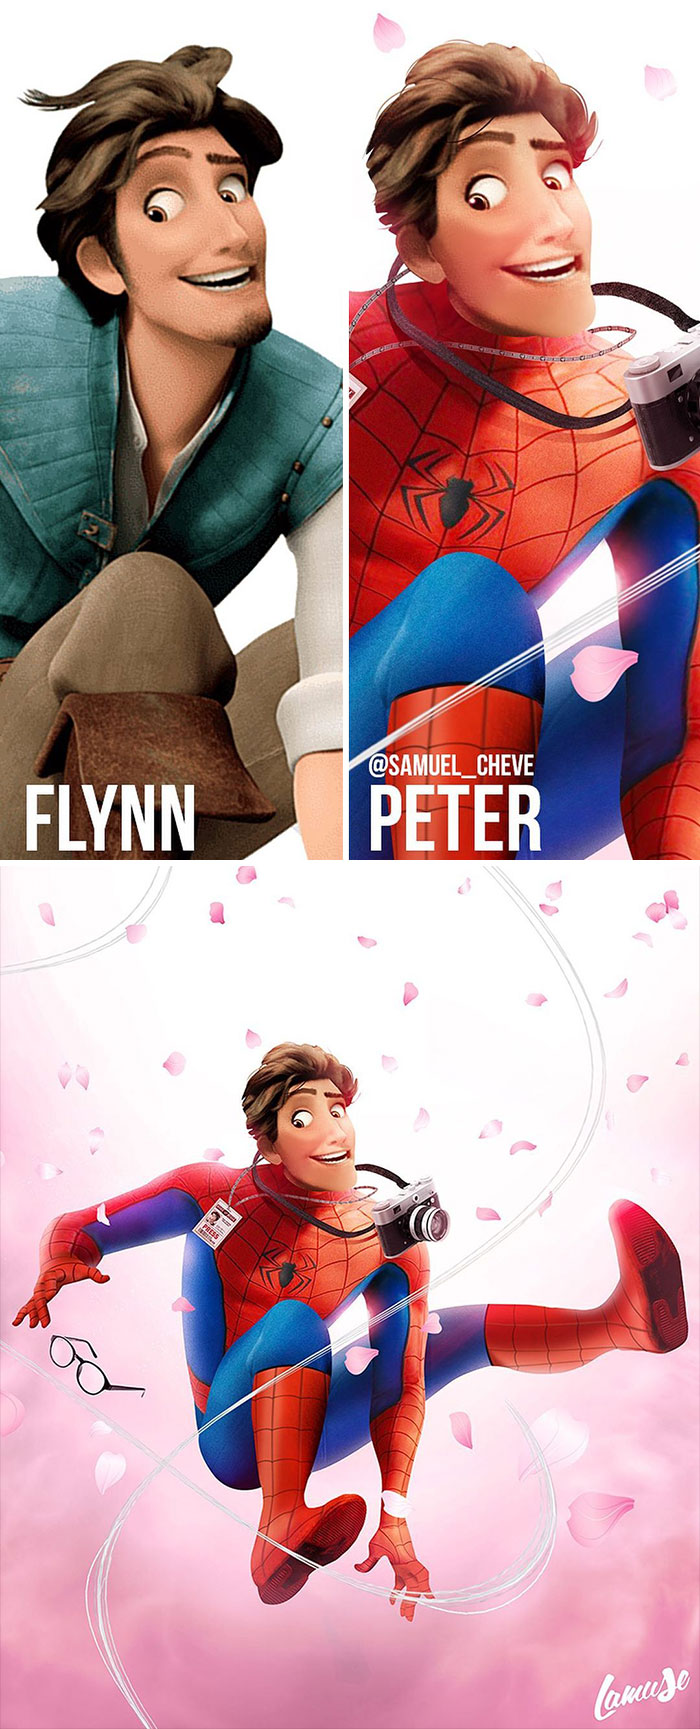 Flynn And Peter Parker 'Spiderman'